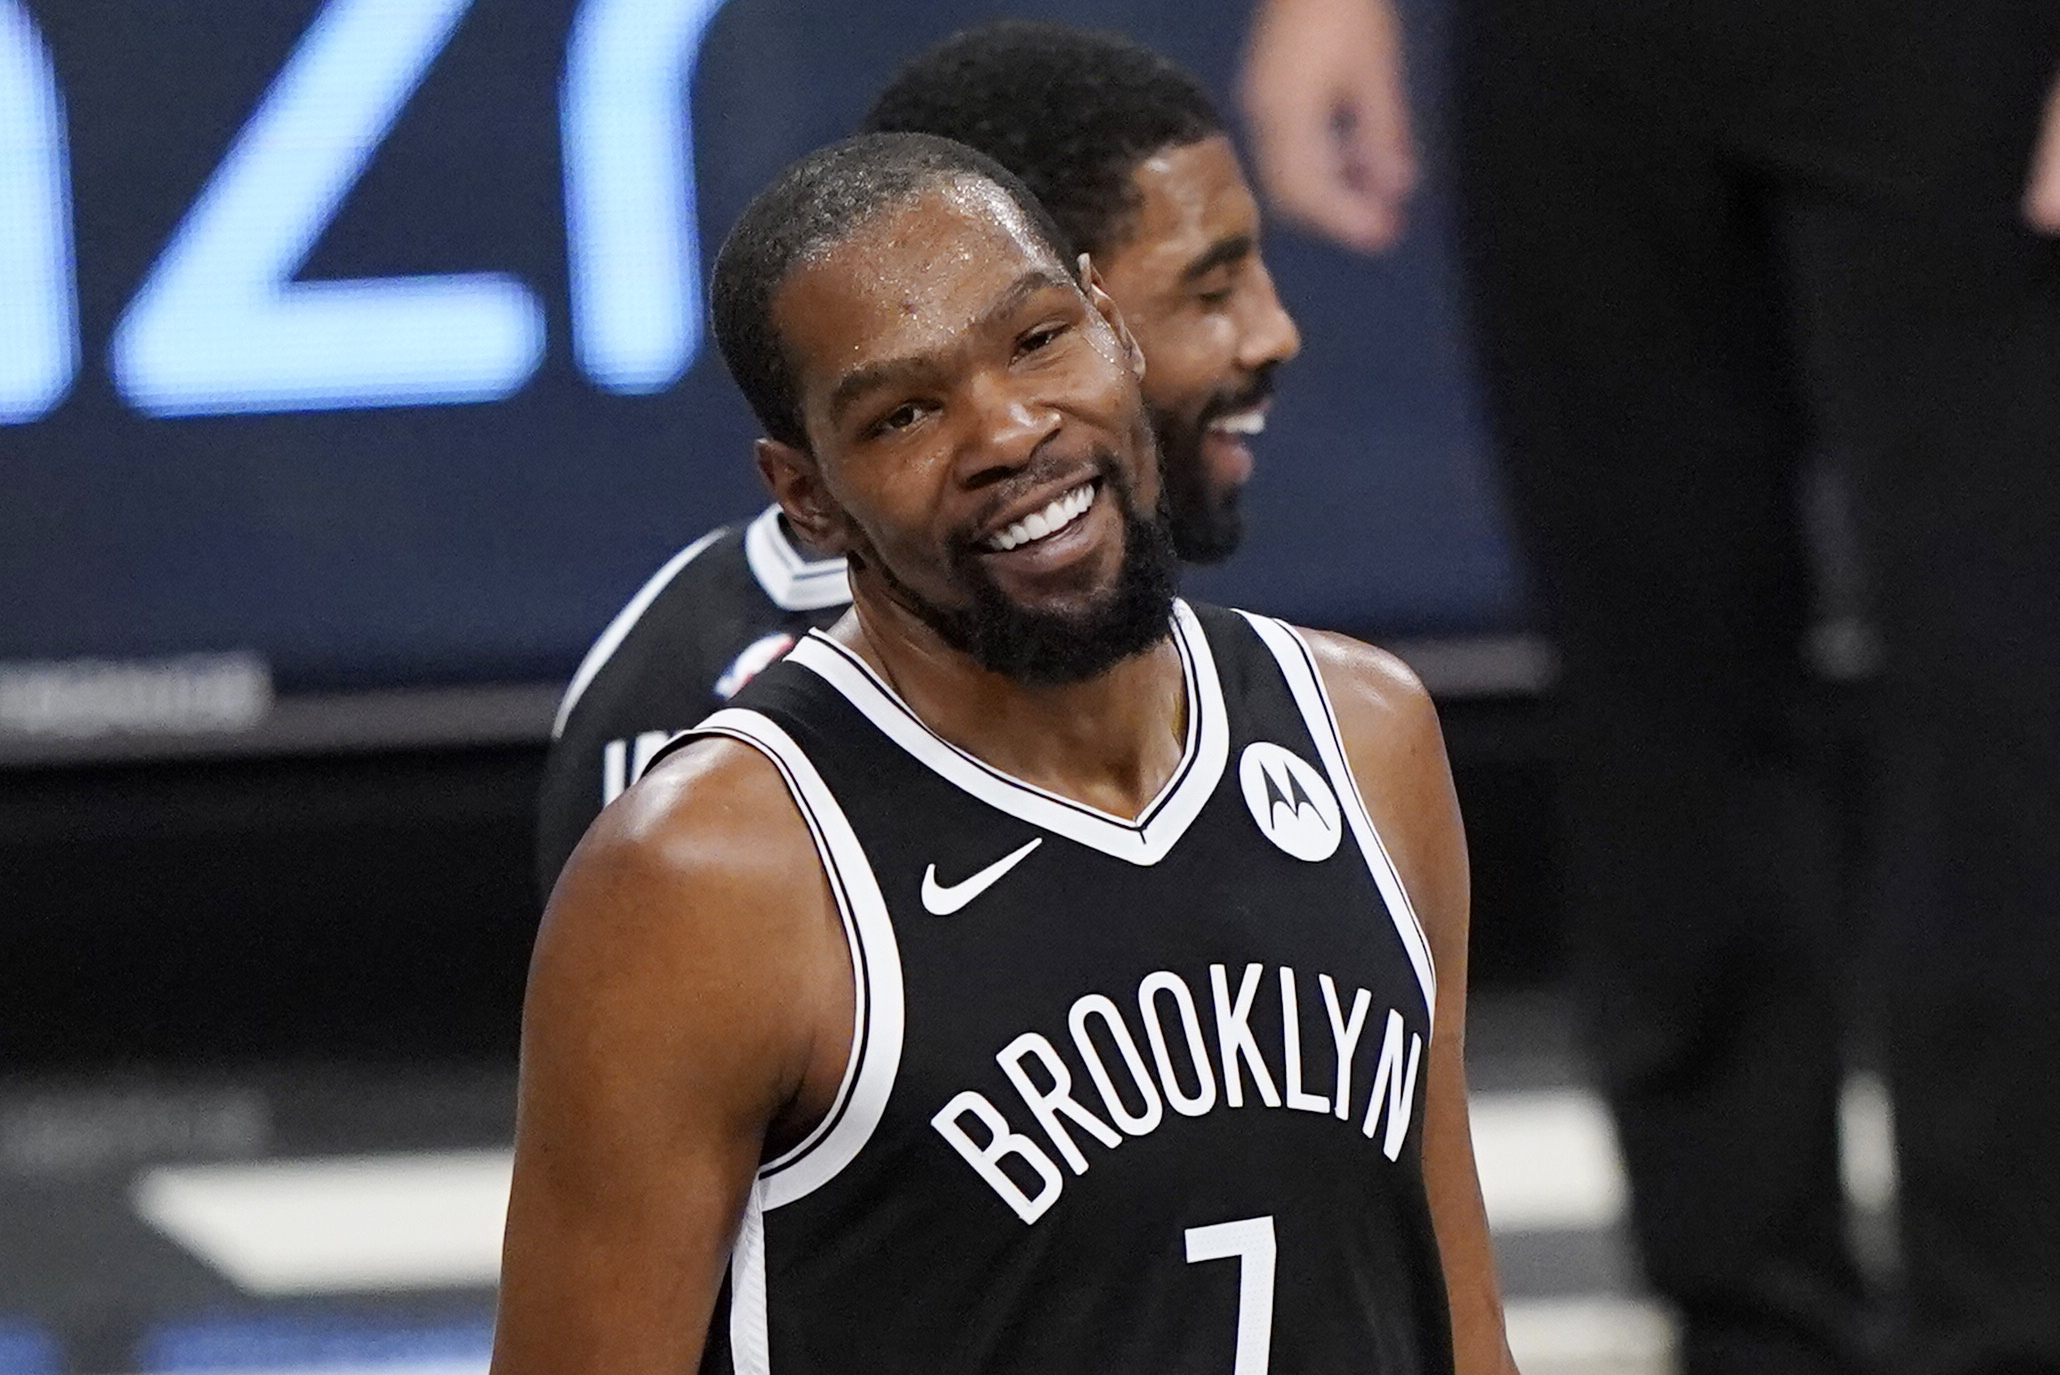 PHOTO: Are these the Nets 2019/20 official jerseys? - NetsDaily